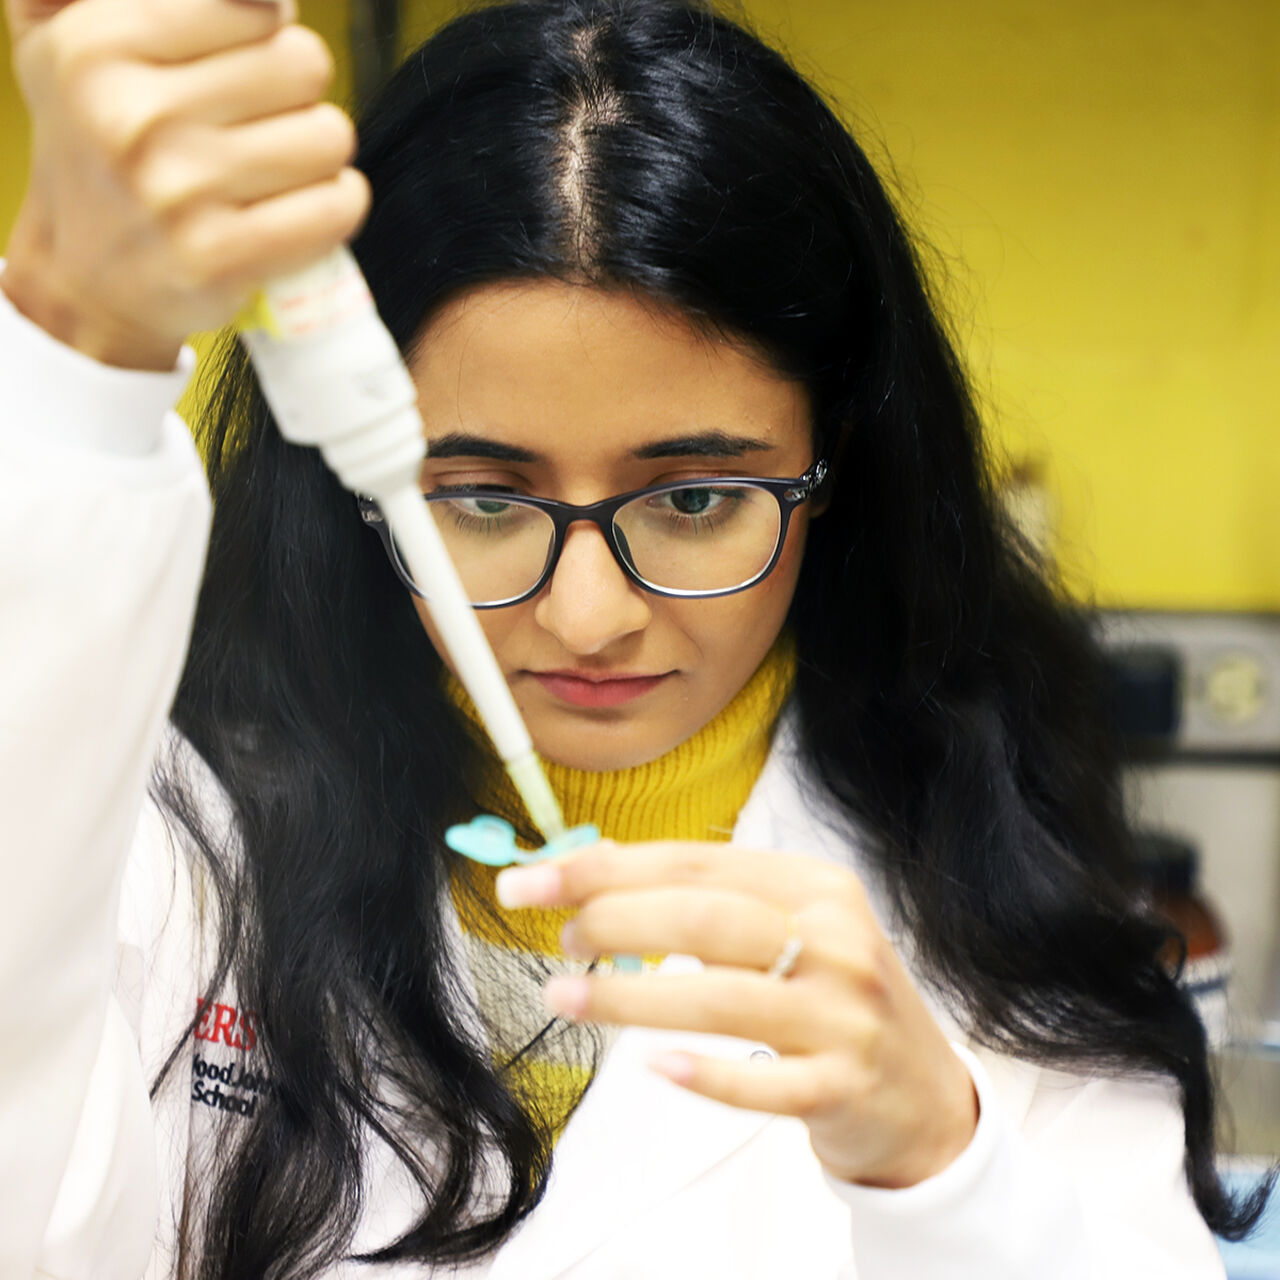 Student pipetting a sample in an Robert Wood Johnson Medical School laboratory image number 0